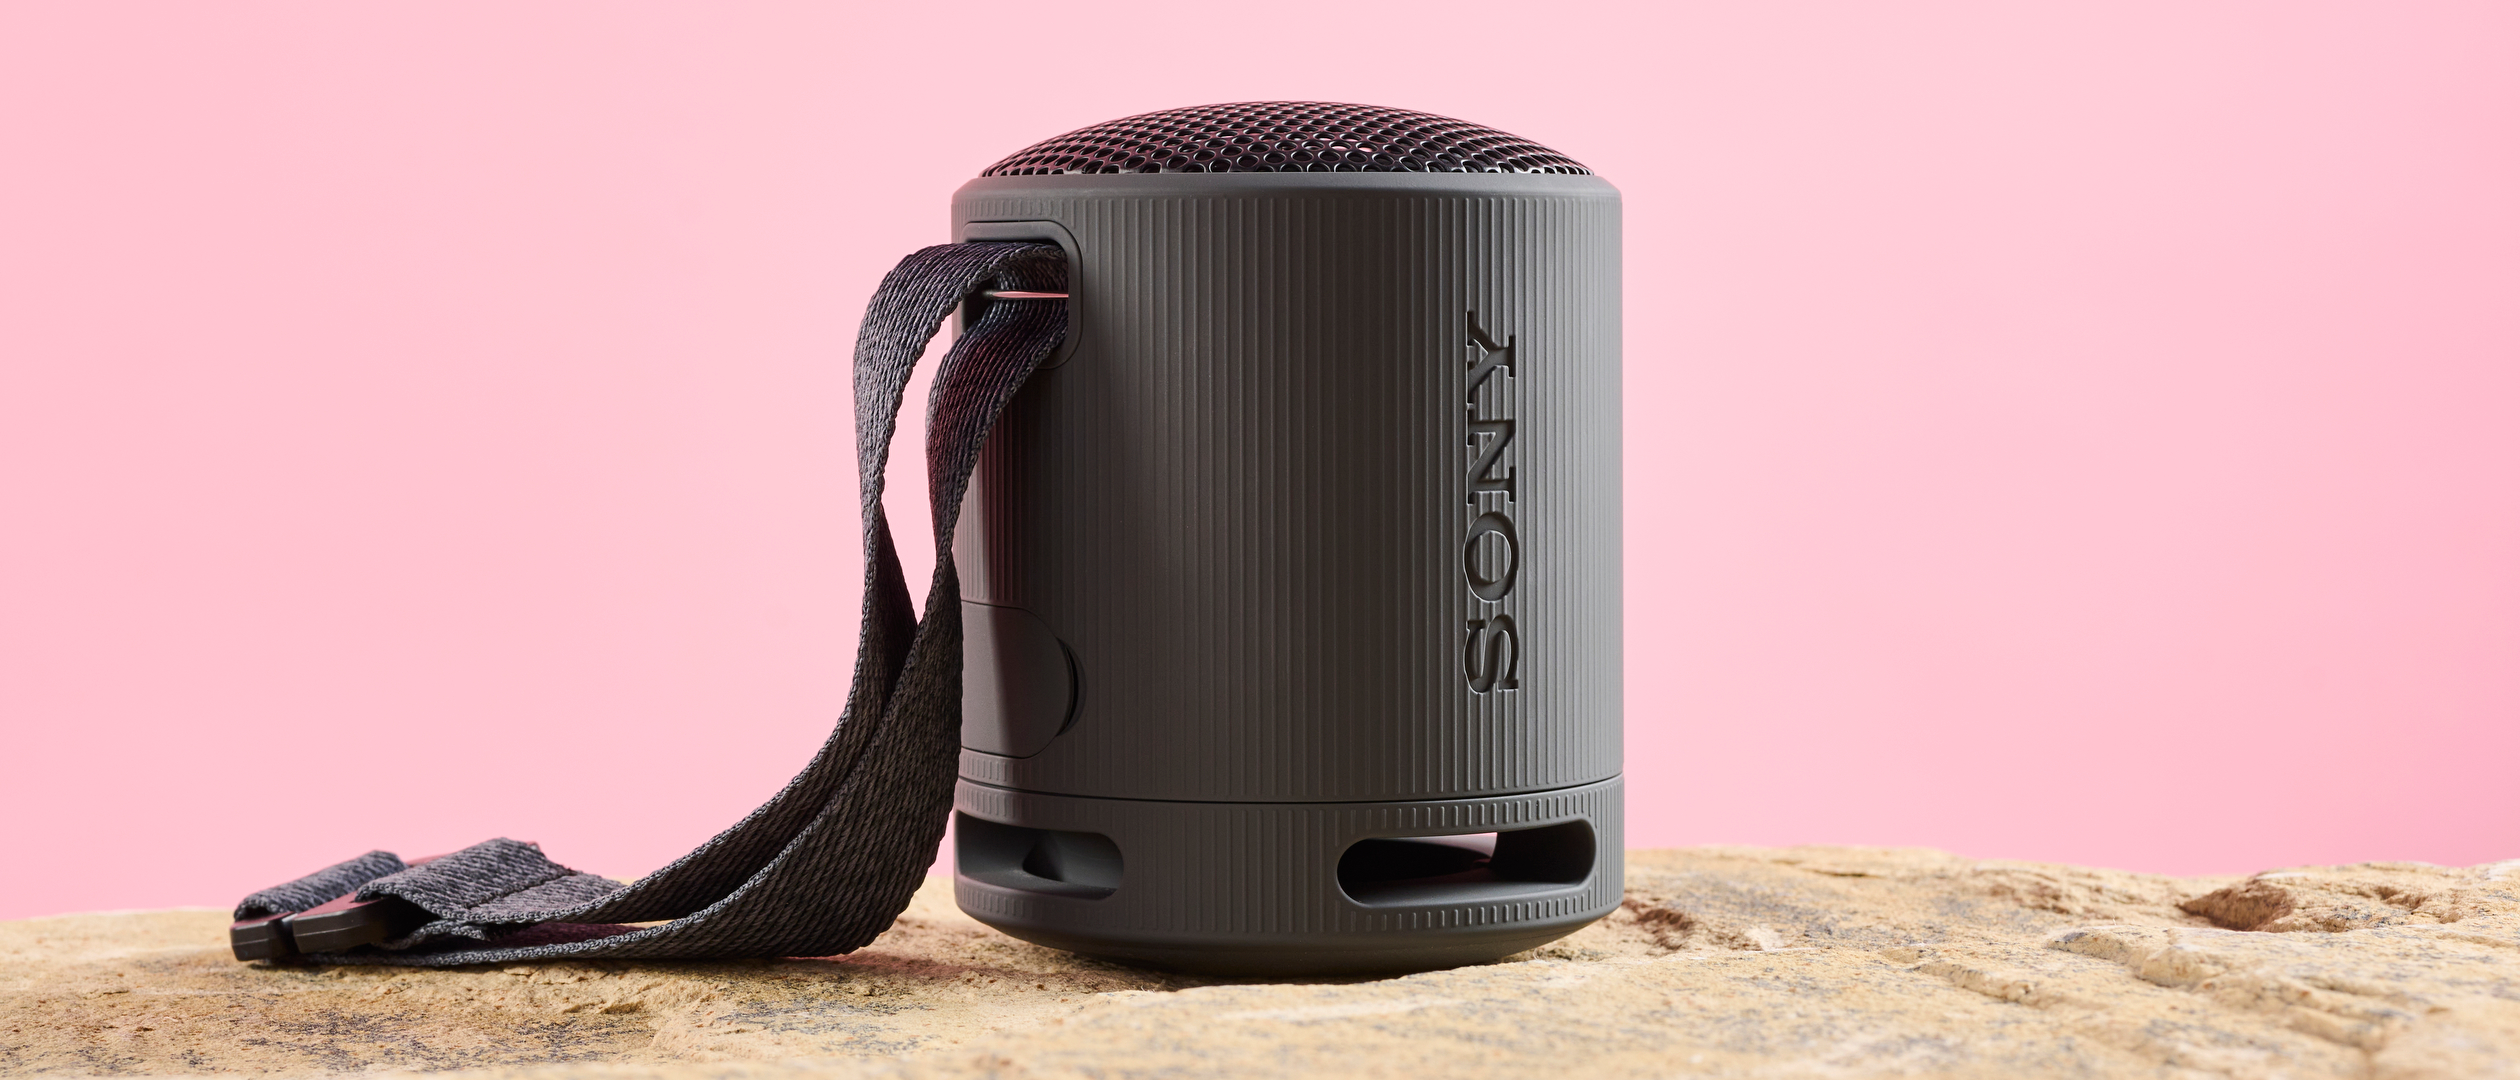 Sony SRS-XB100 review: a cheap Bluetooth speaker with good sound but too few features